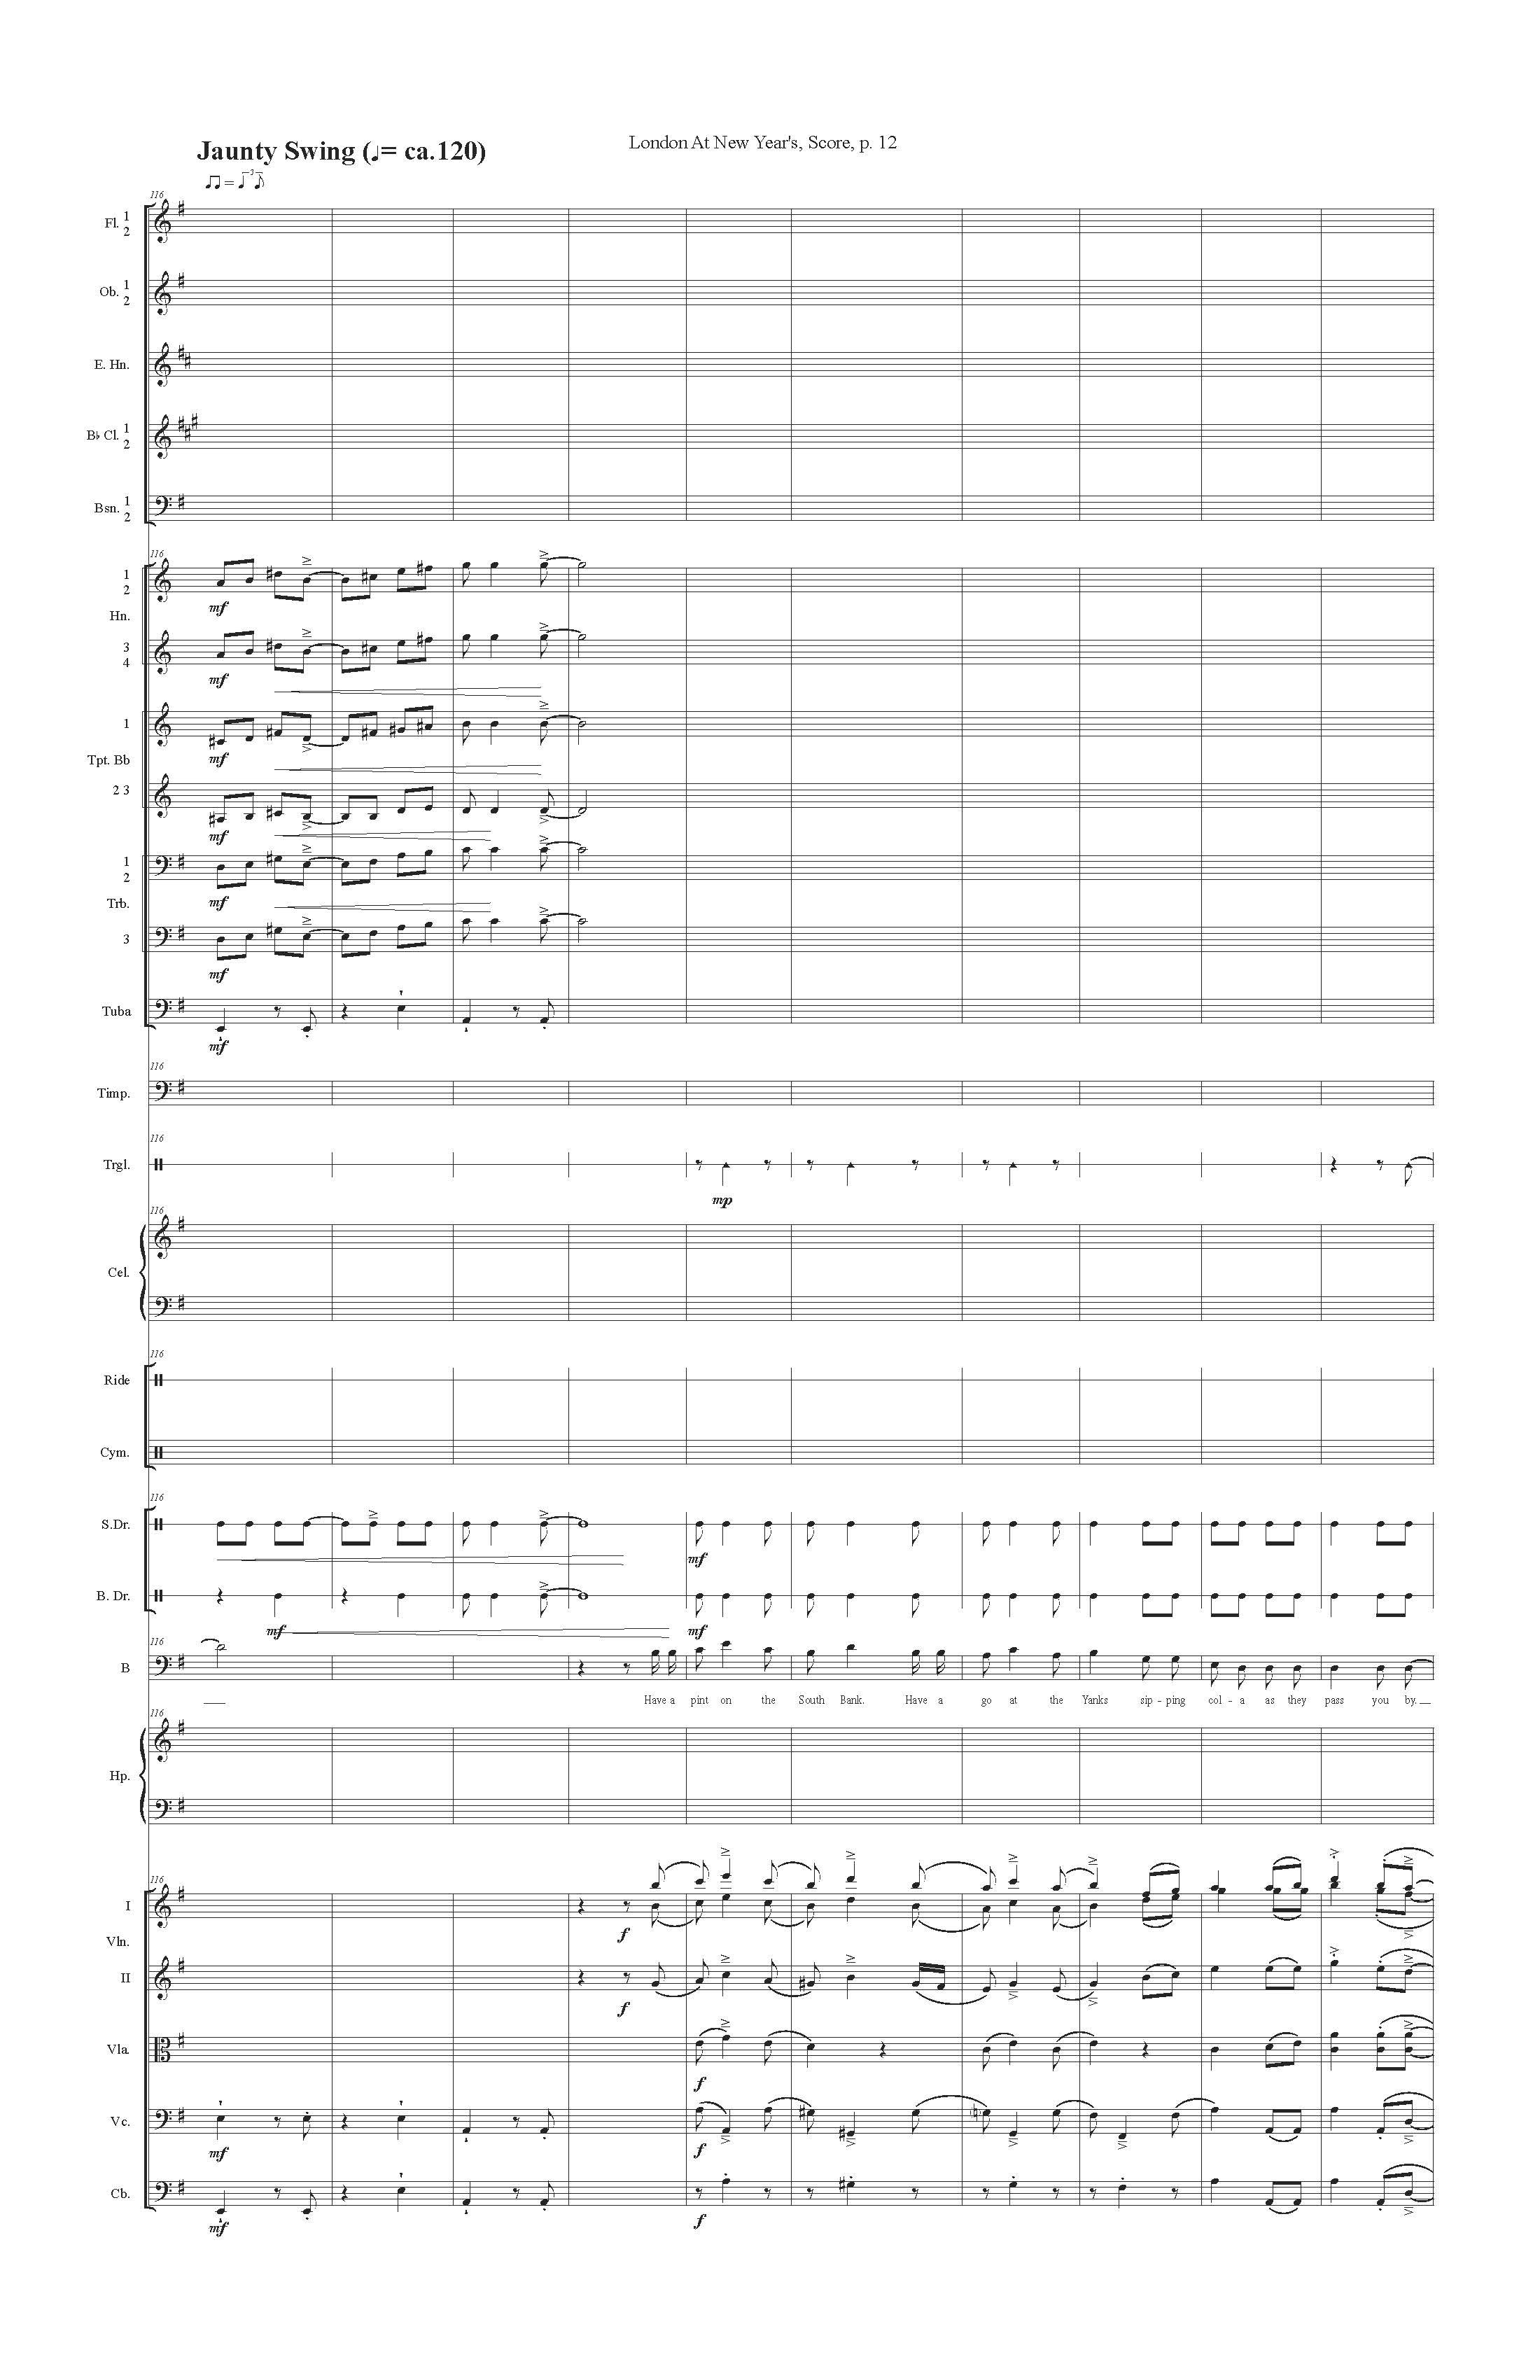 LONDON AT NEW YEARS ORCH - Score_Page_12.jpg